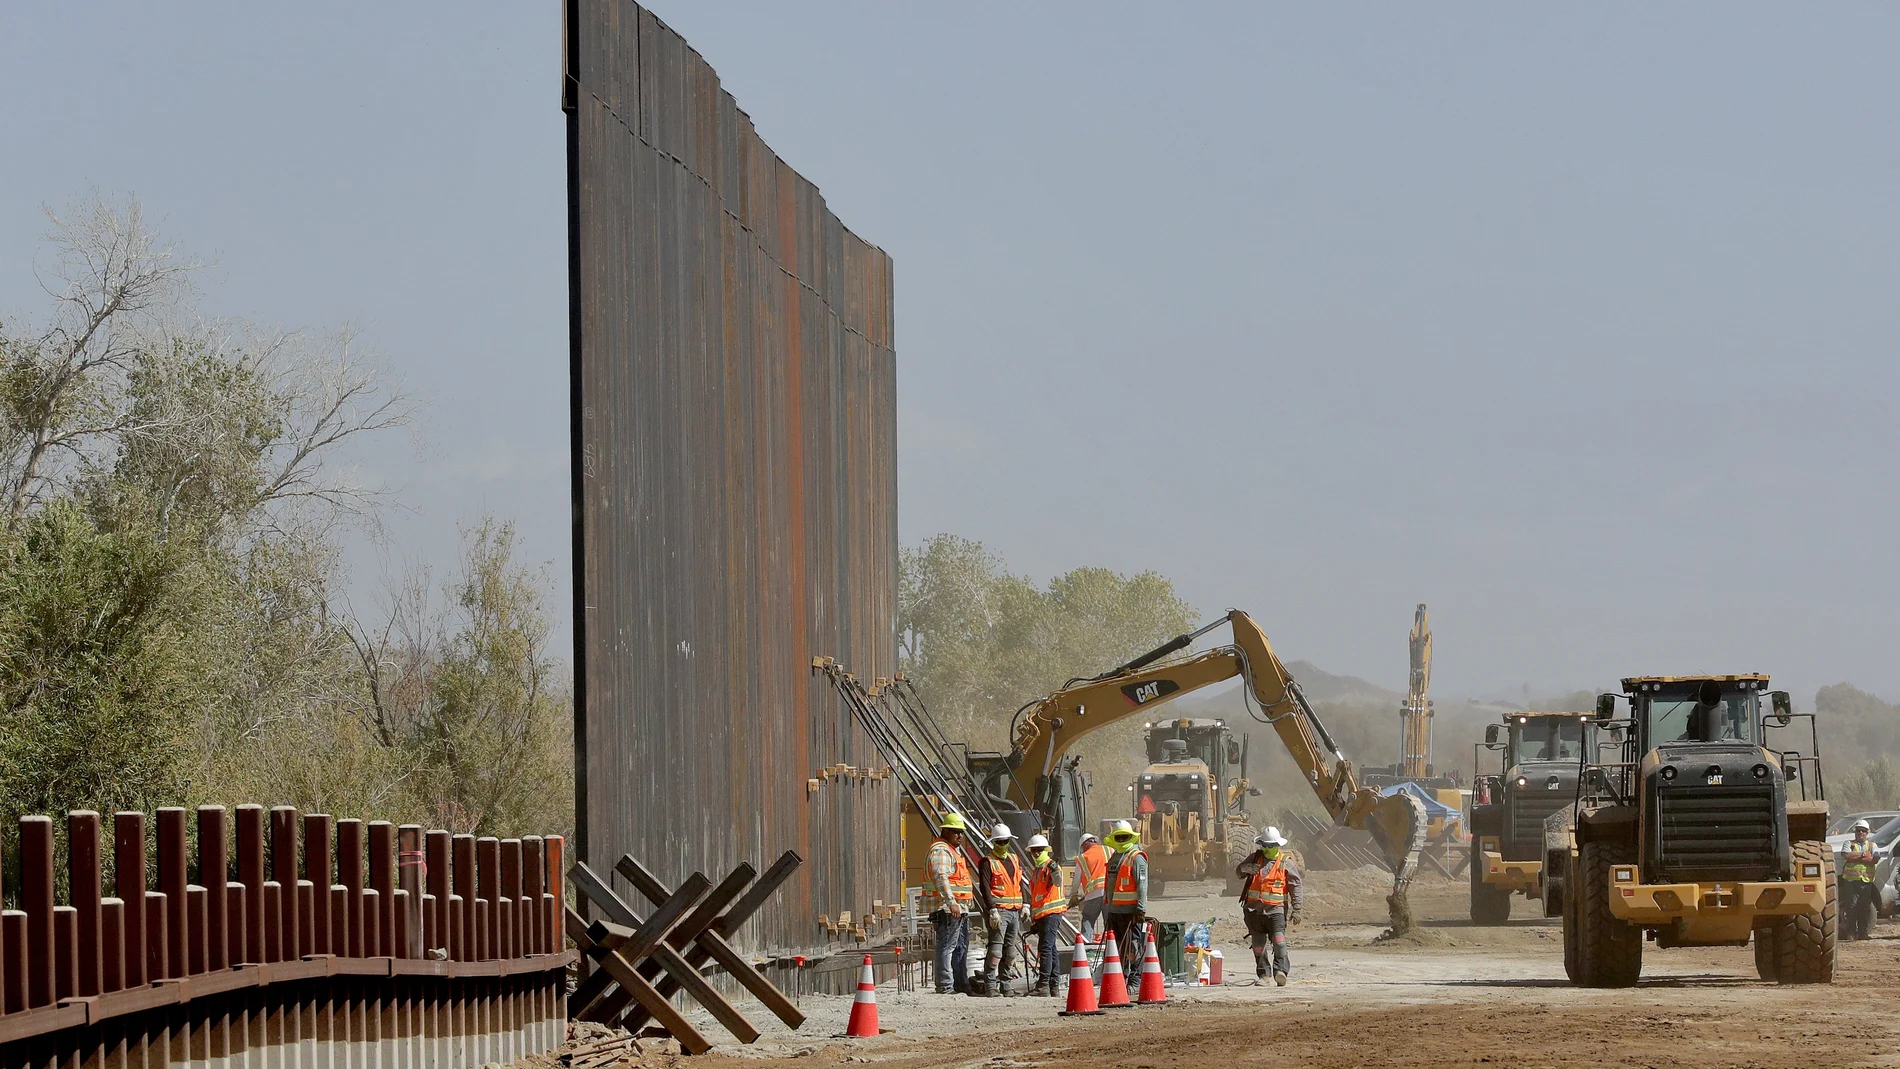 FILE - In this Sept. 10, 2019 file photo government contractors erect a section of Pentagon-funded border wall along the Colorado River in Yuma, Ariz. The federal Bureau of Land Management said on Tuesday, July 21, 2020, it's transferred over 65 acres of public land in Arizona and New Mexico to the Army for construction of border wall infrastructure. (AP Photo/Matt York,File)